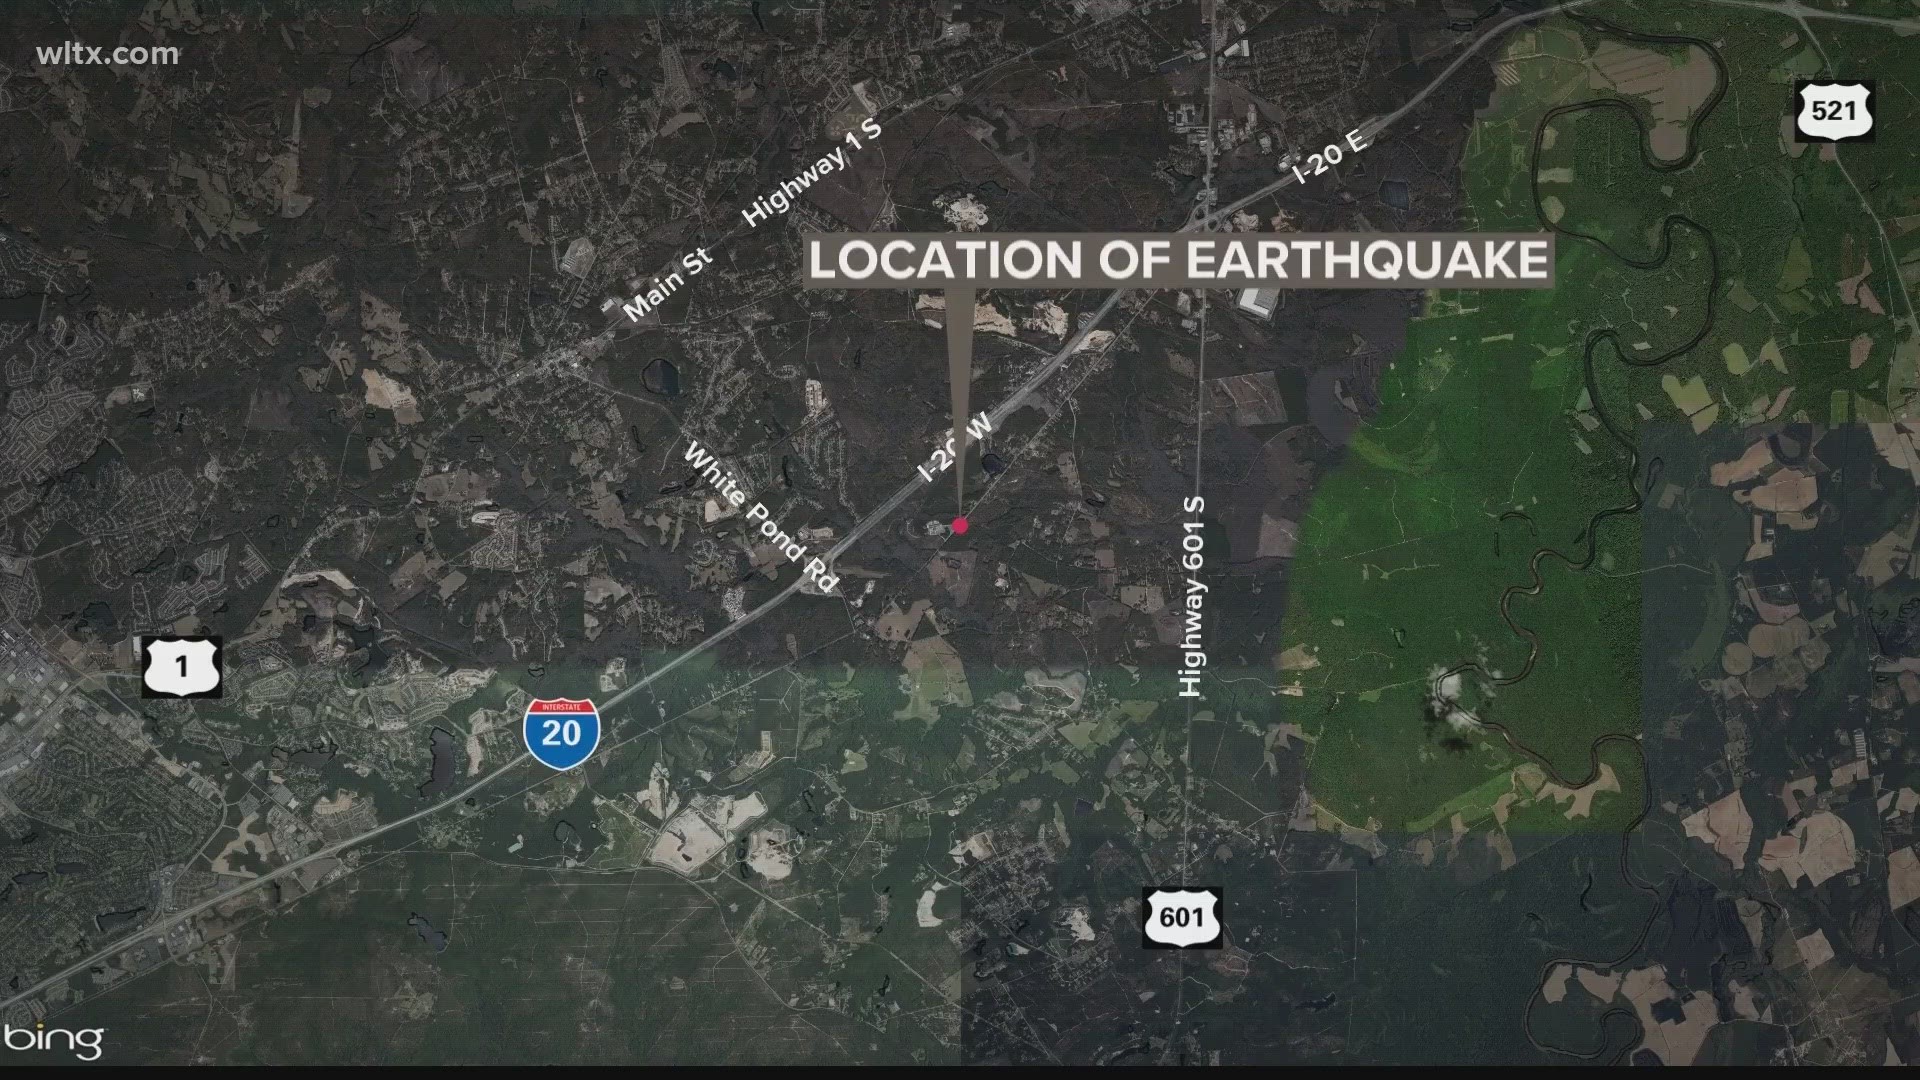 The earthquake happened just after 9am just east of Interstate 20 near Elgin.